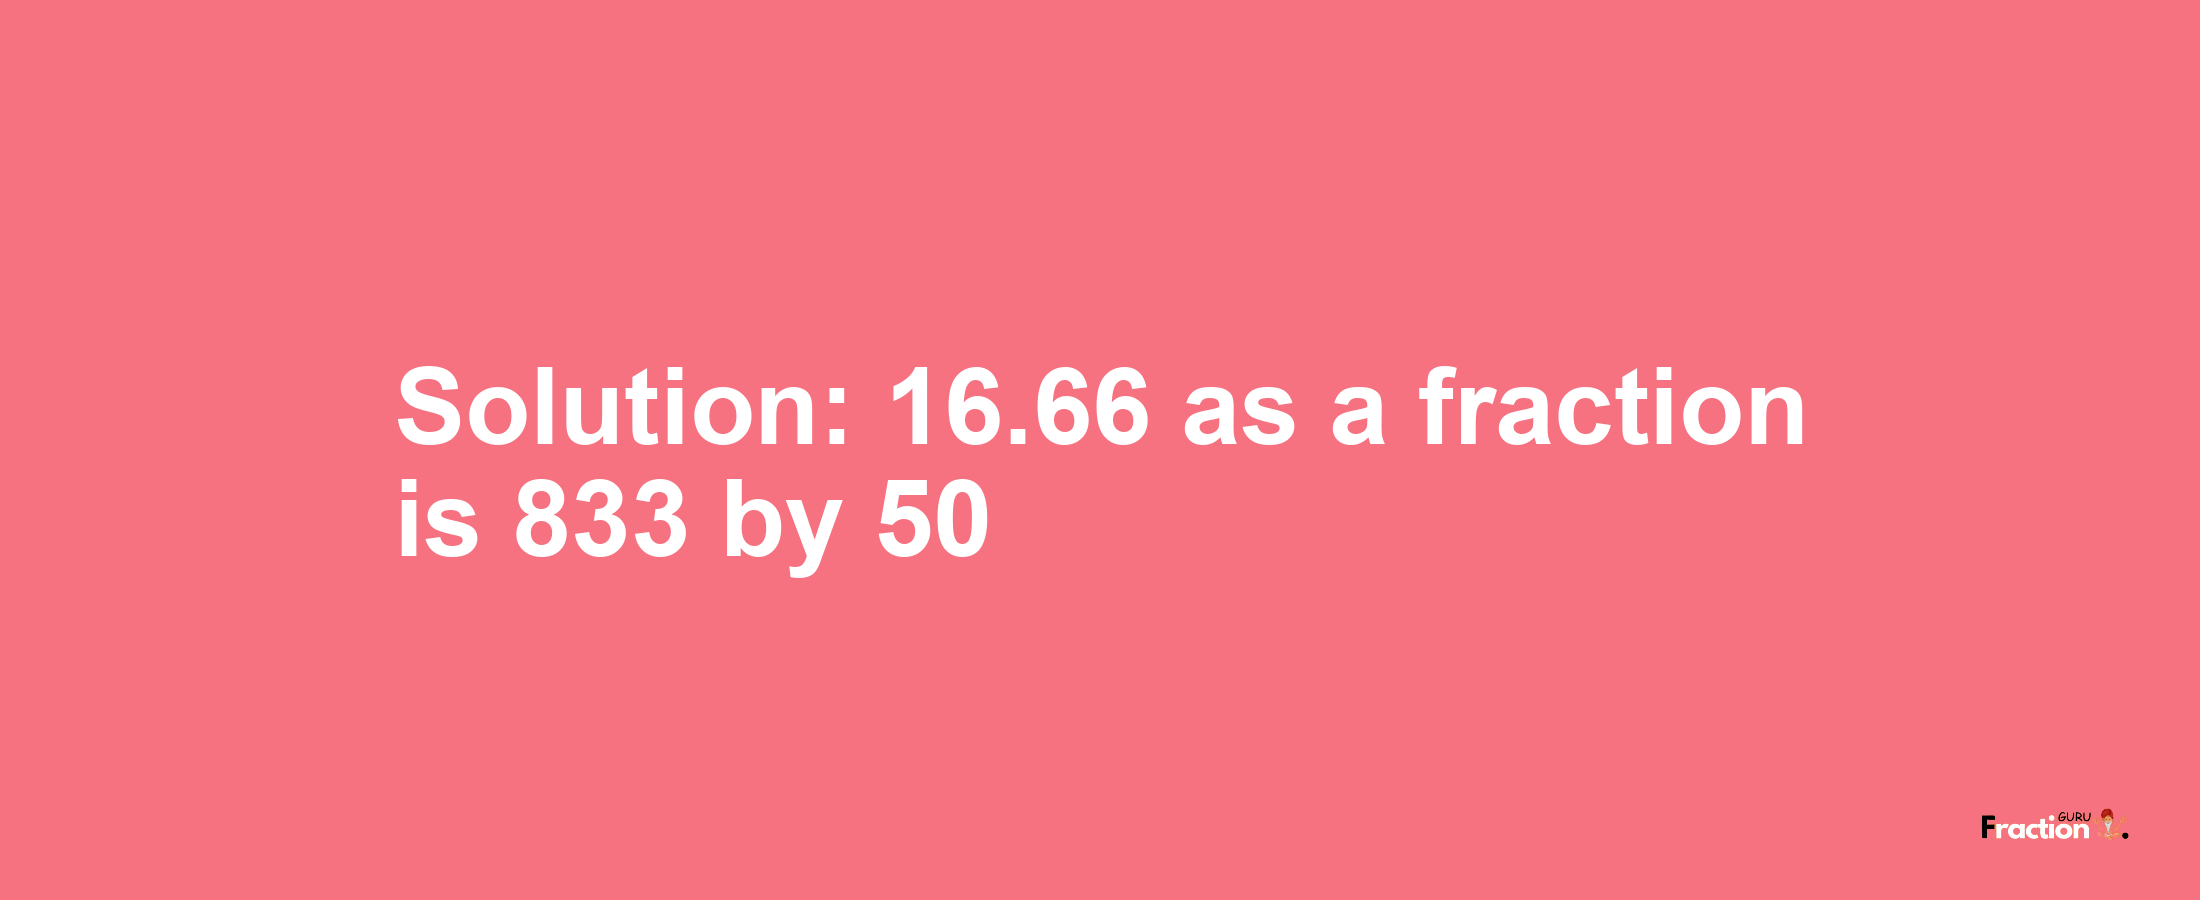 Solution:16.66 as a fraction is 833/50